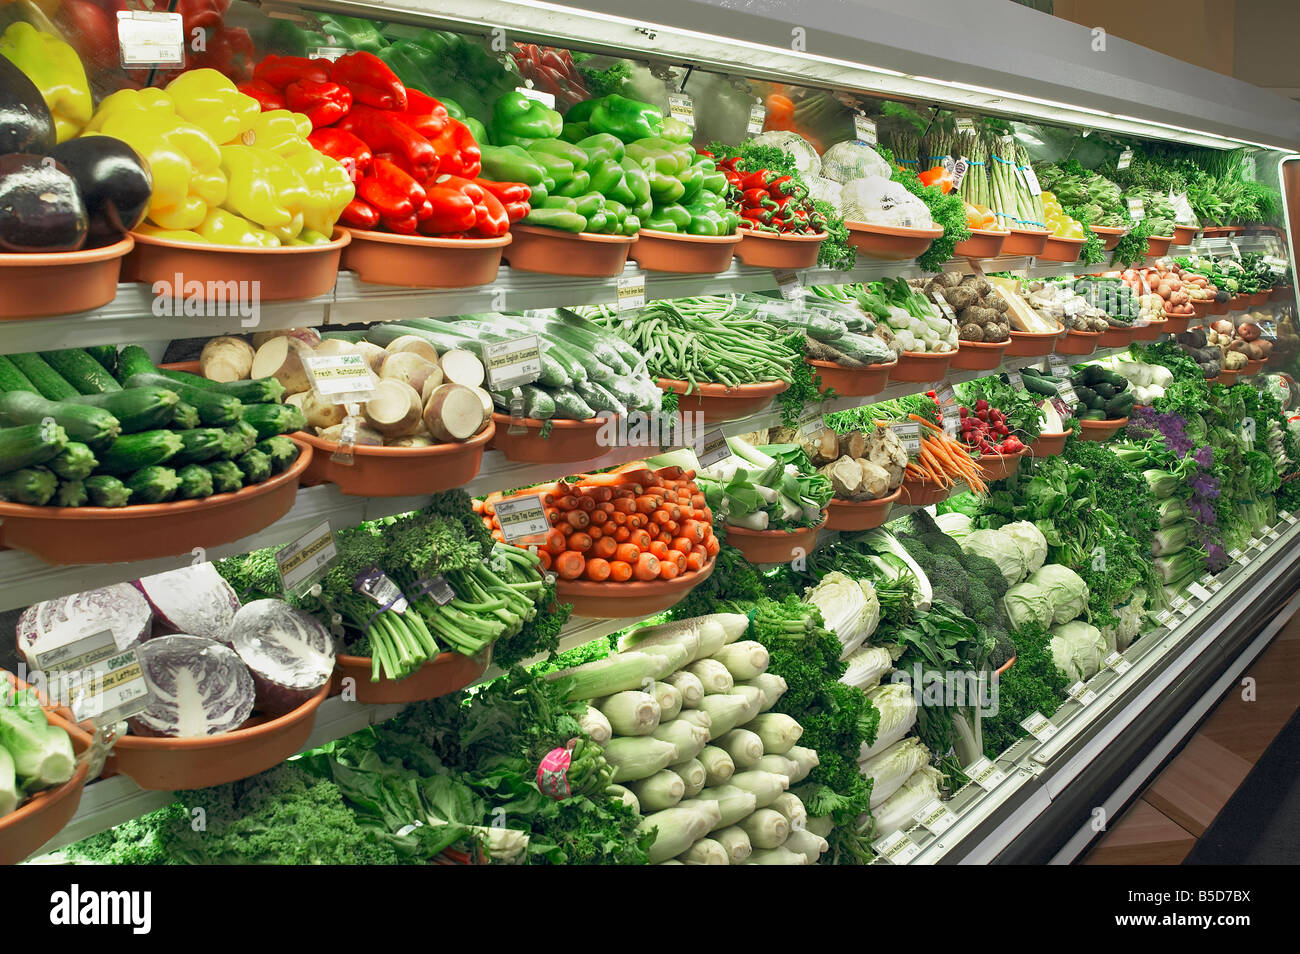 Produce Aisle of Grocery Store [IMAGE]